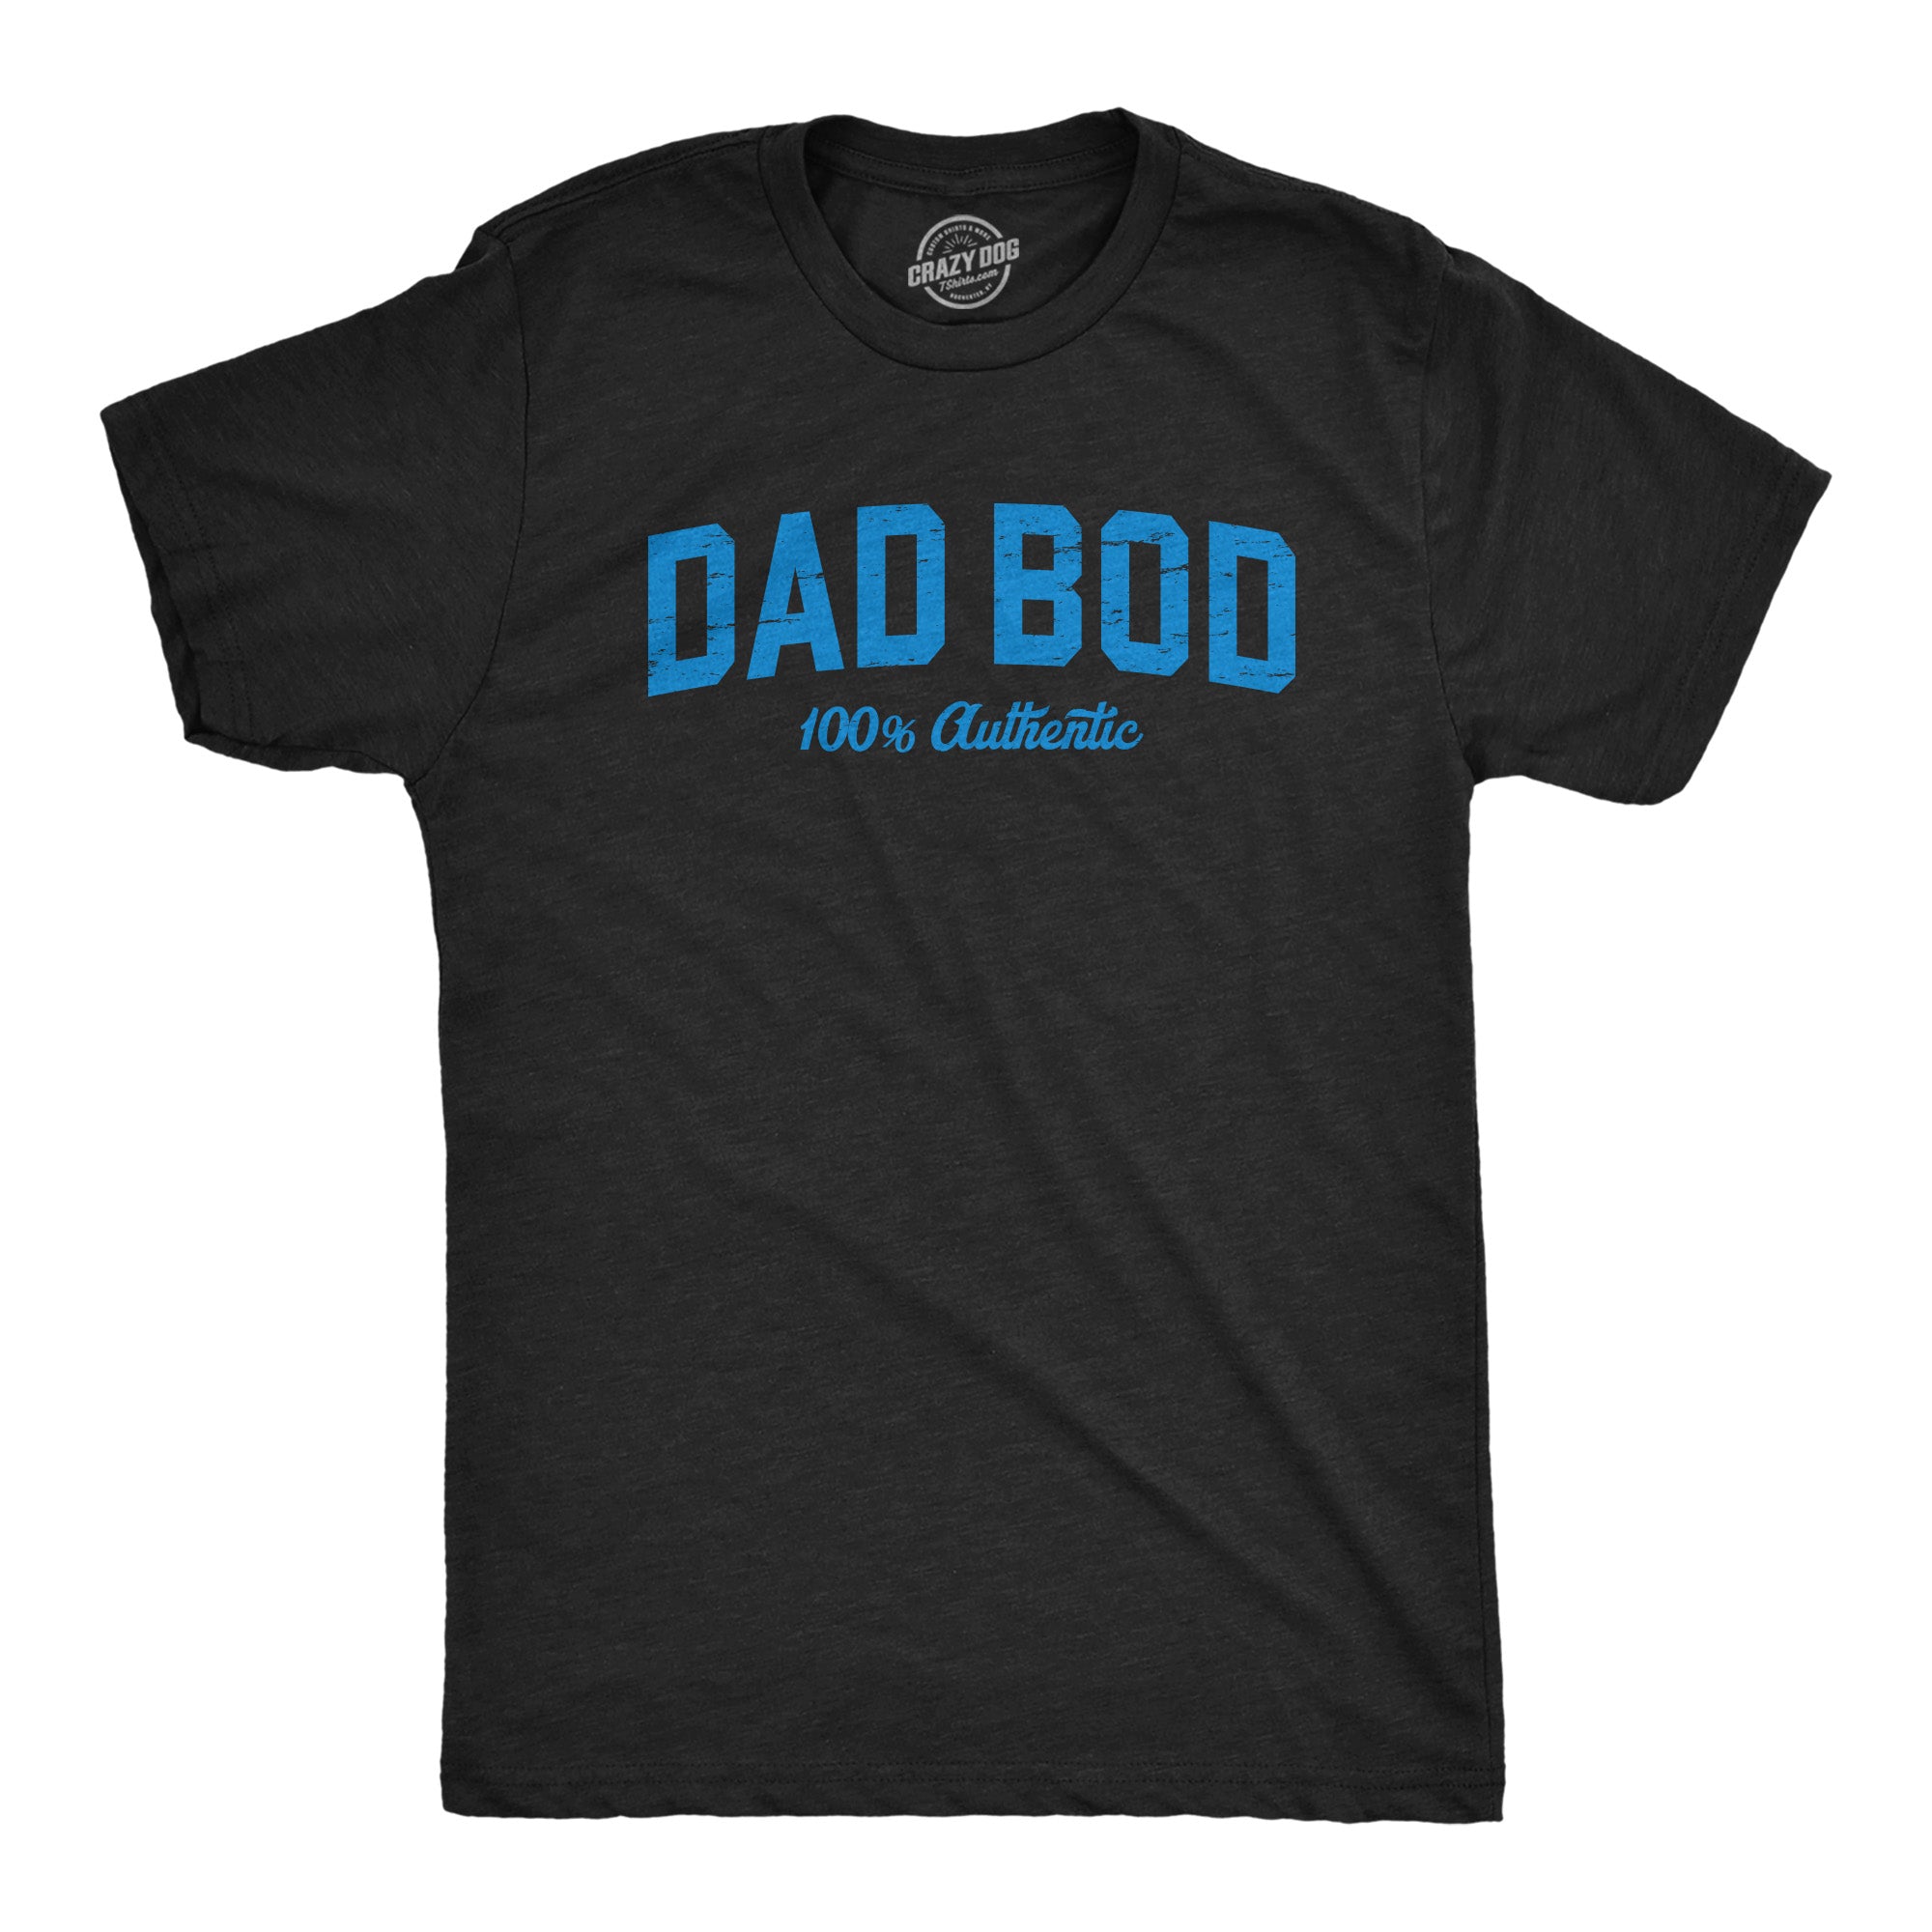 Funny Heather Black - DADBOD Dad Bod 100 Percent Authentic Mens T Shirt Nerdy Father's Day Fitness sarcastic Tee